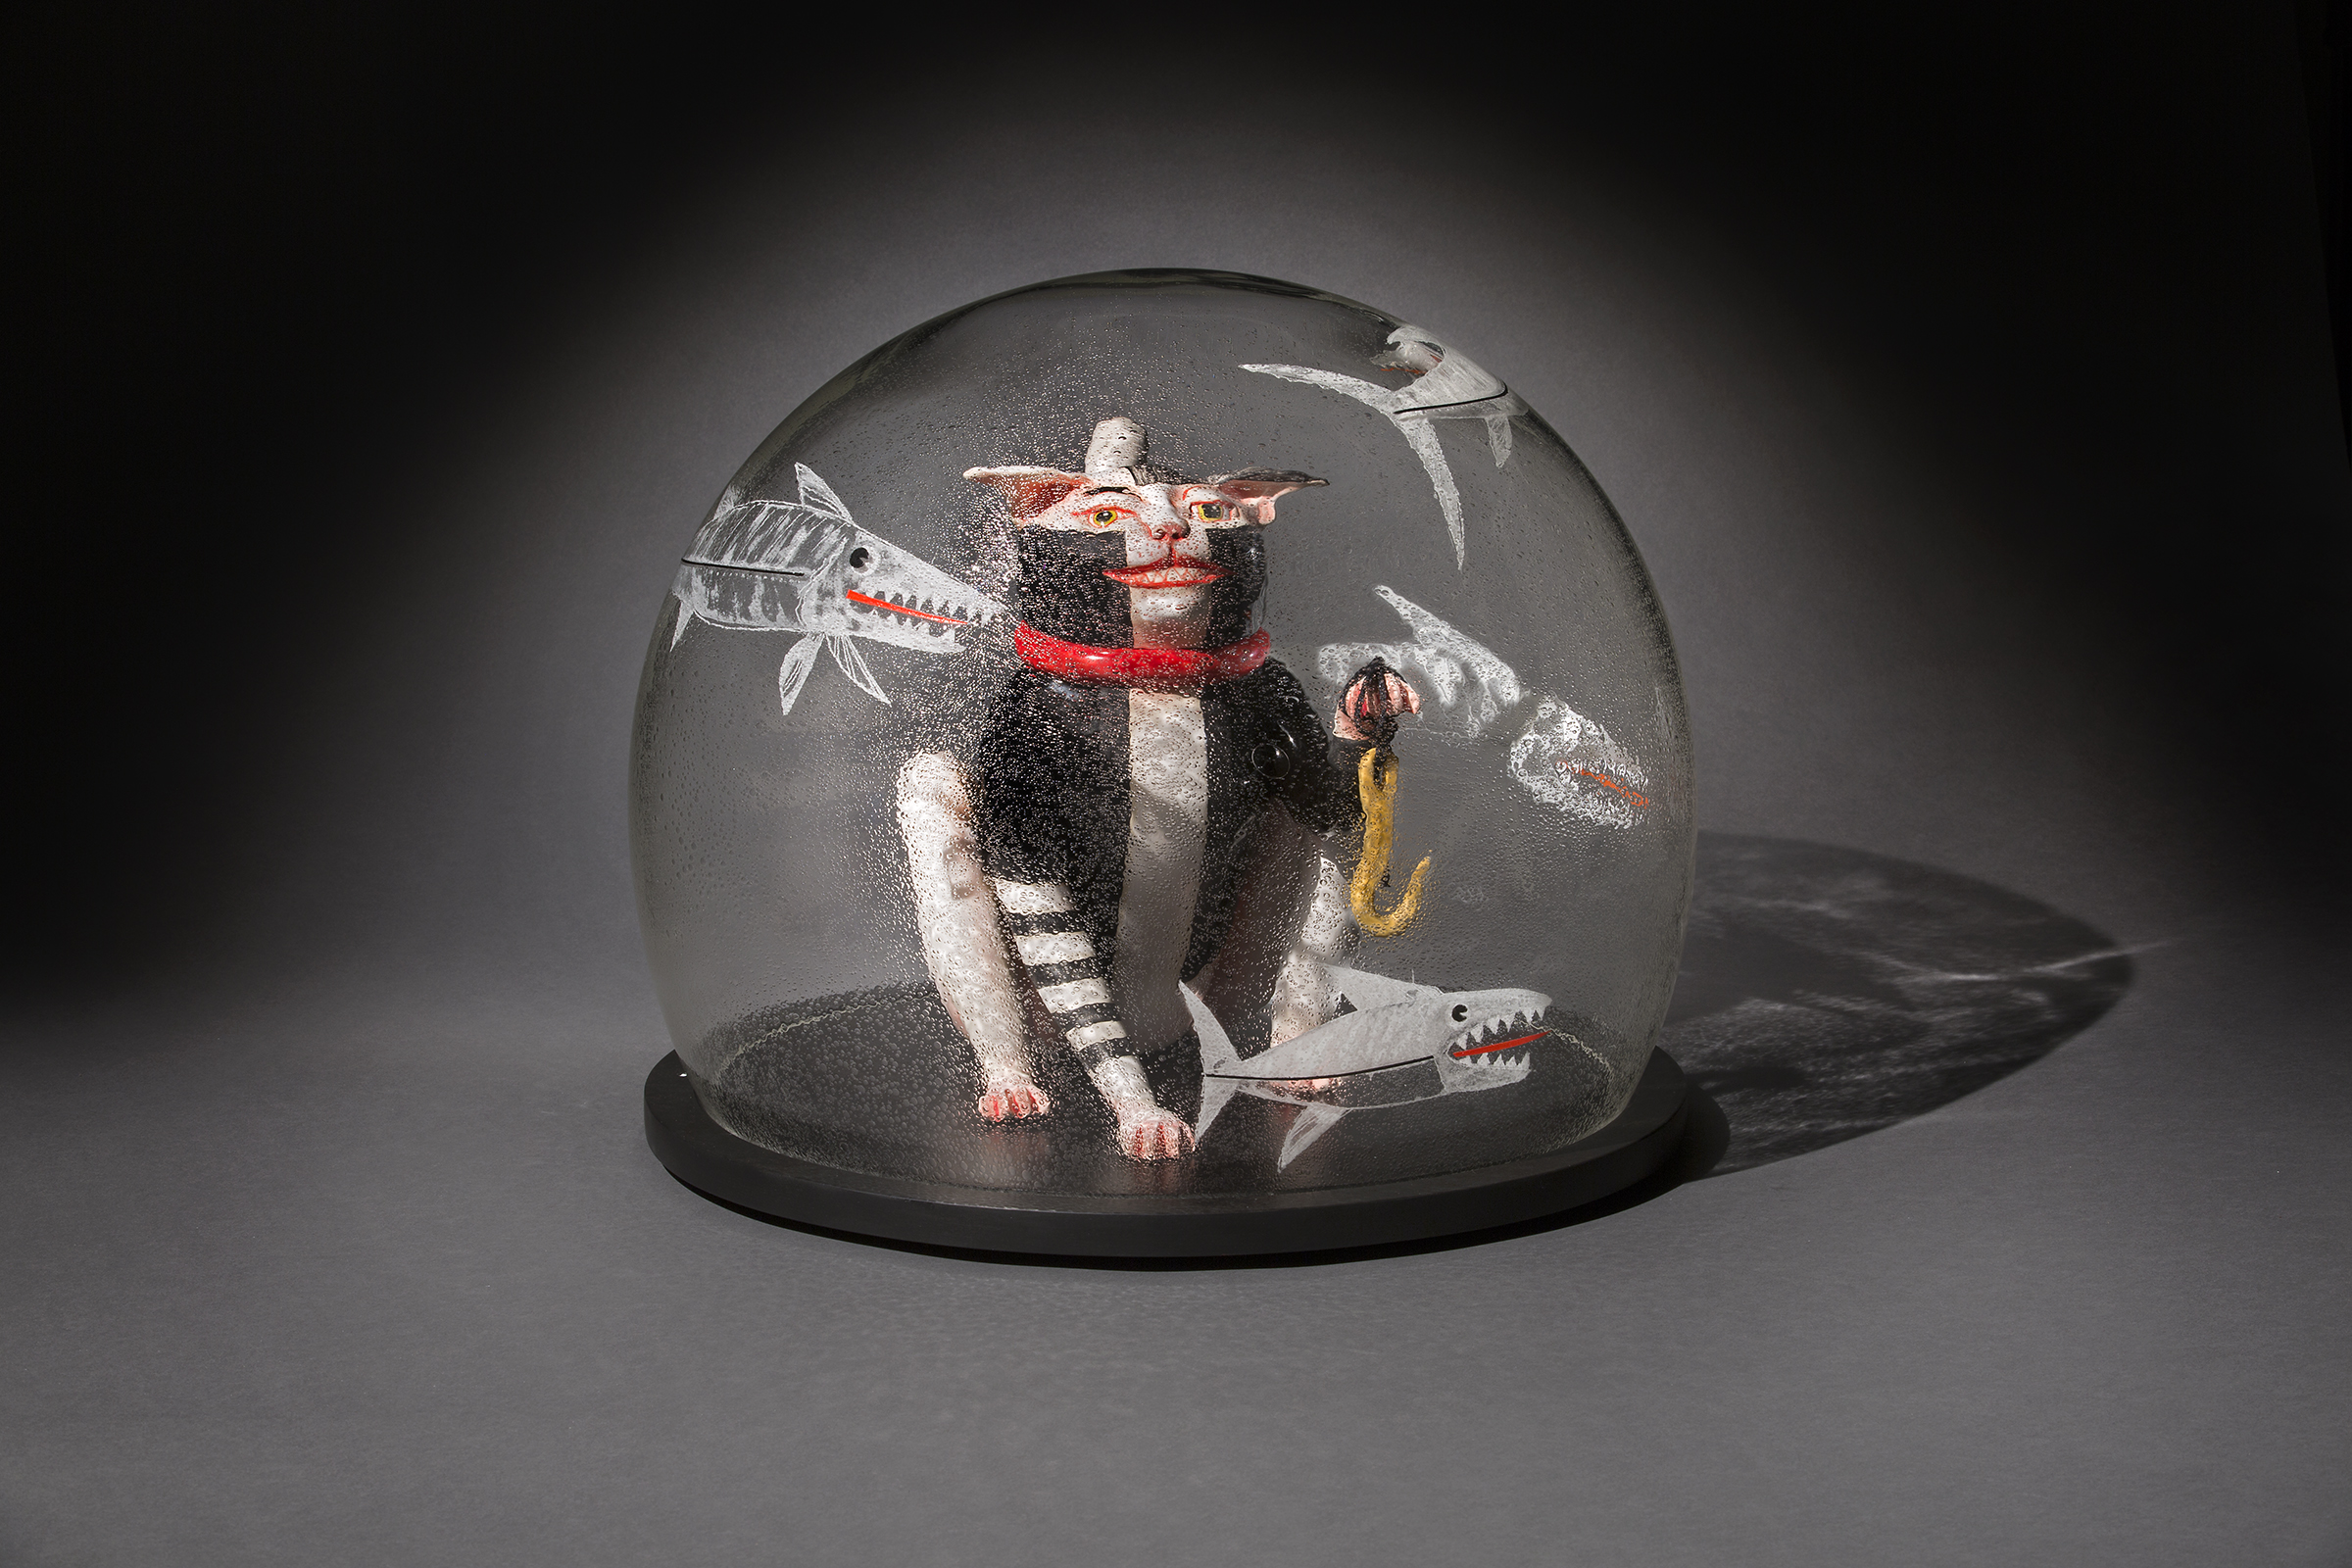  Patti Warashina (American, born 1940).&nbsp; Fish Pond,  Made at the Museum in 2014.&nbsp;Glass, earthenware, underglaze, glaze, and mixed media;&nbsp;15 x 19 x 16 in. Collection of Museum of Glass, Tacoma, Washington, gift of the artist.&nbsp;Photo